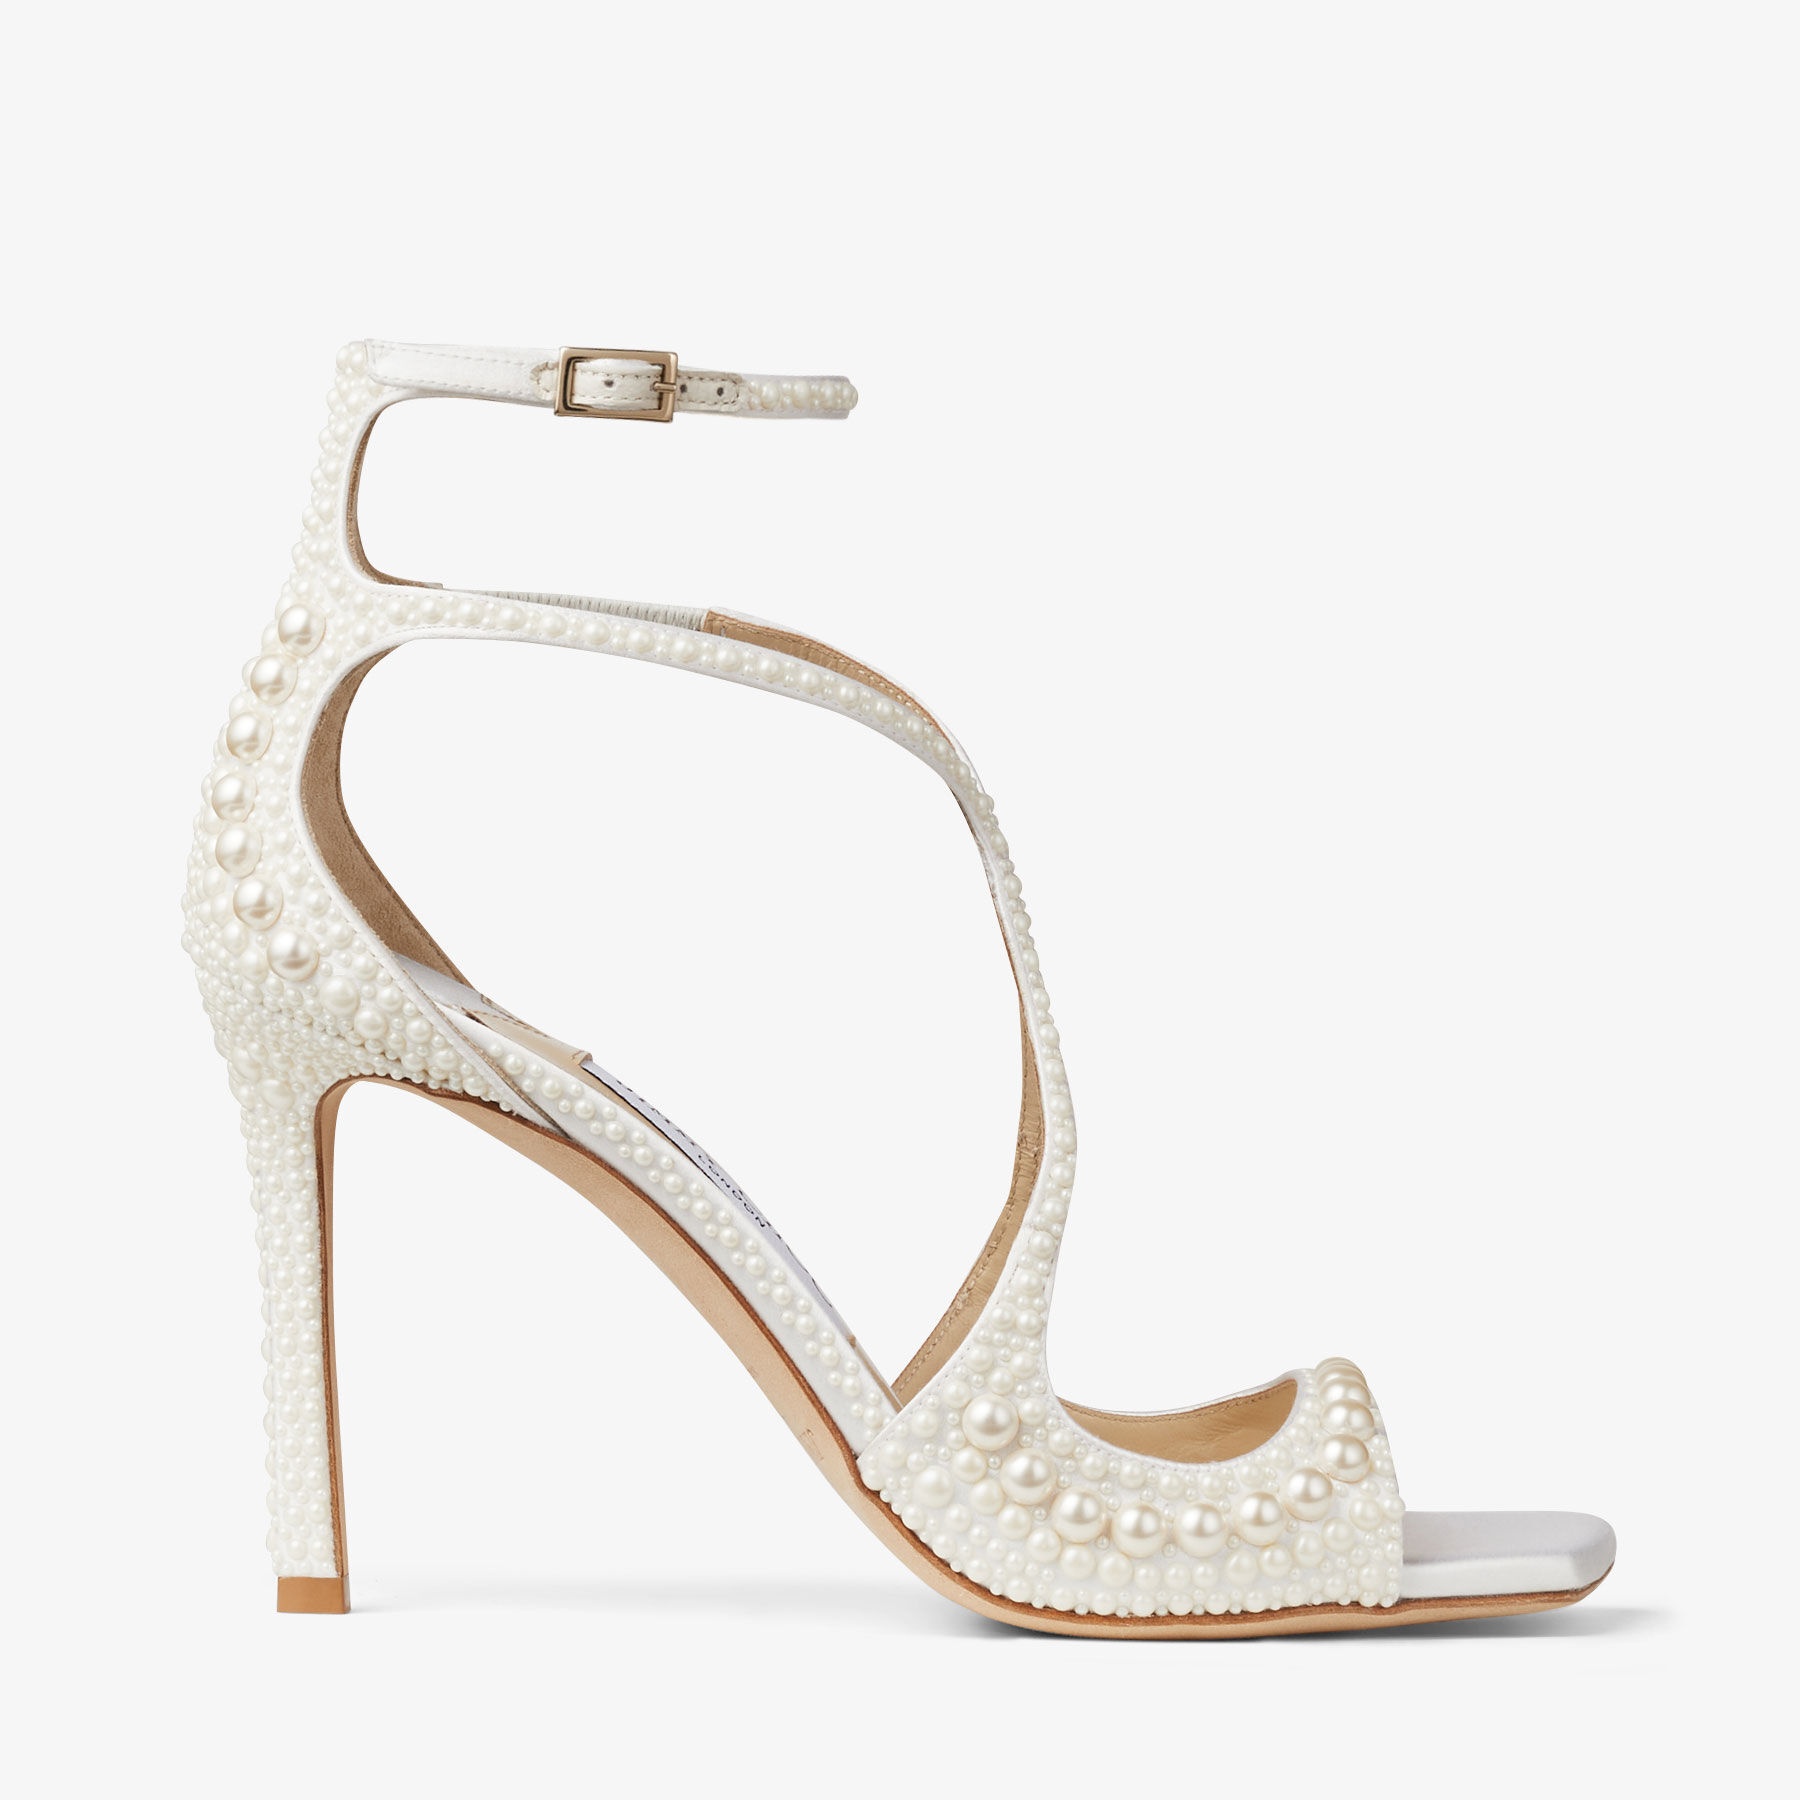 Azia 95
White Satin Sandals with All-Over Pearls - 1